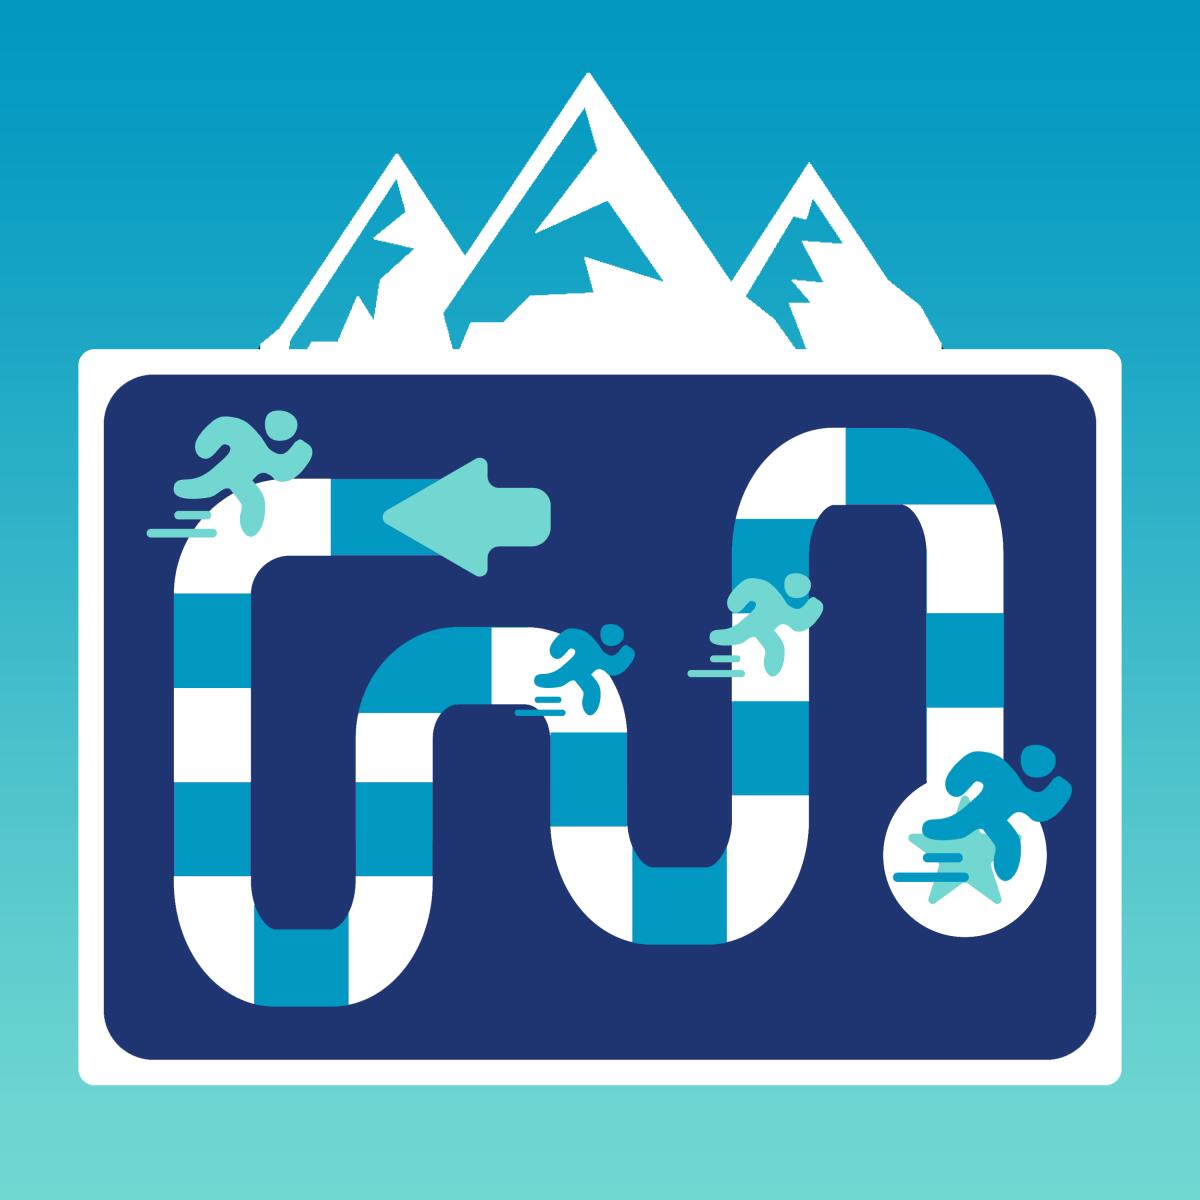 Pictogram of a running-influenced board game with an illustrated mountain above.